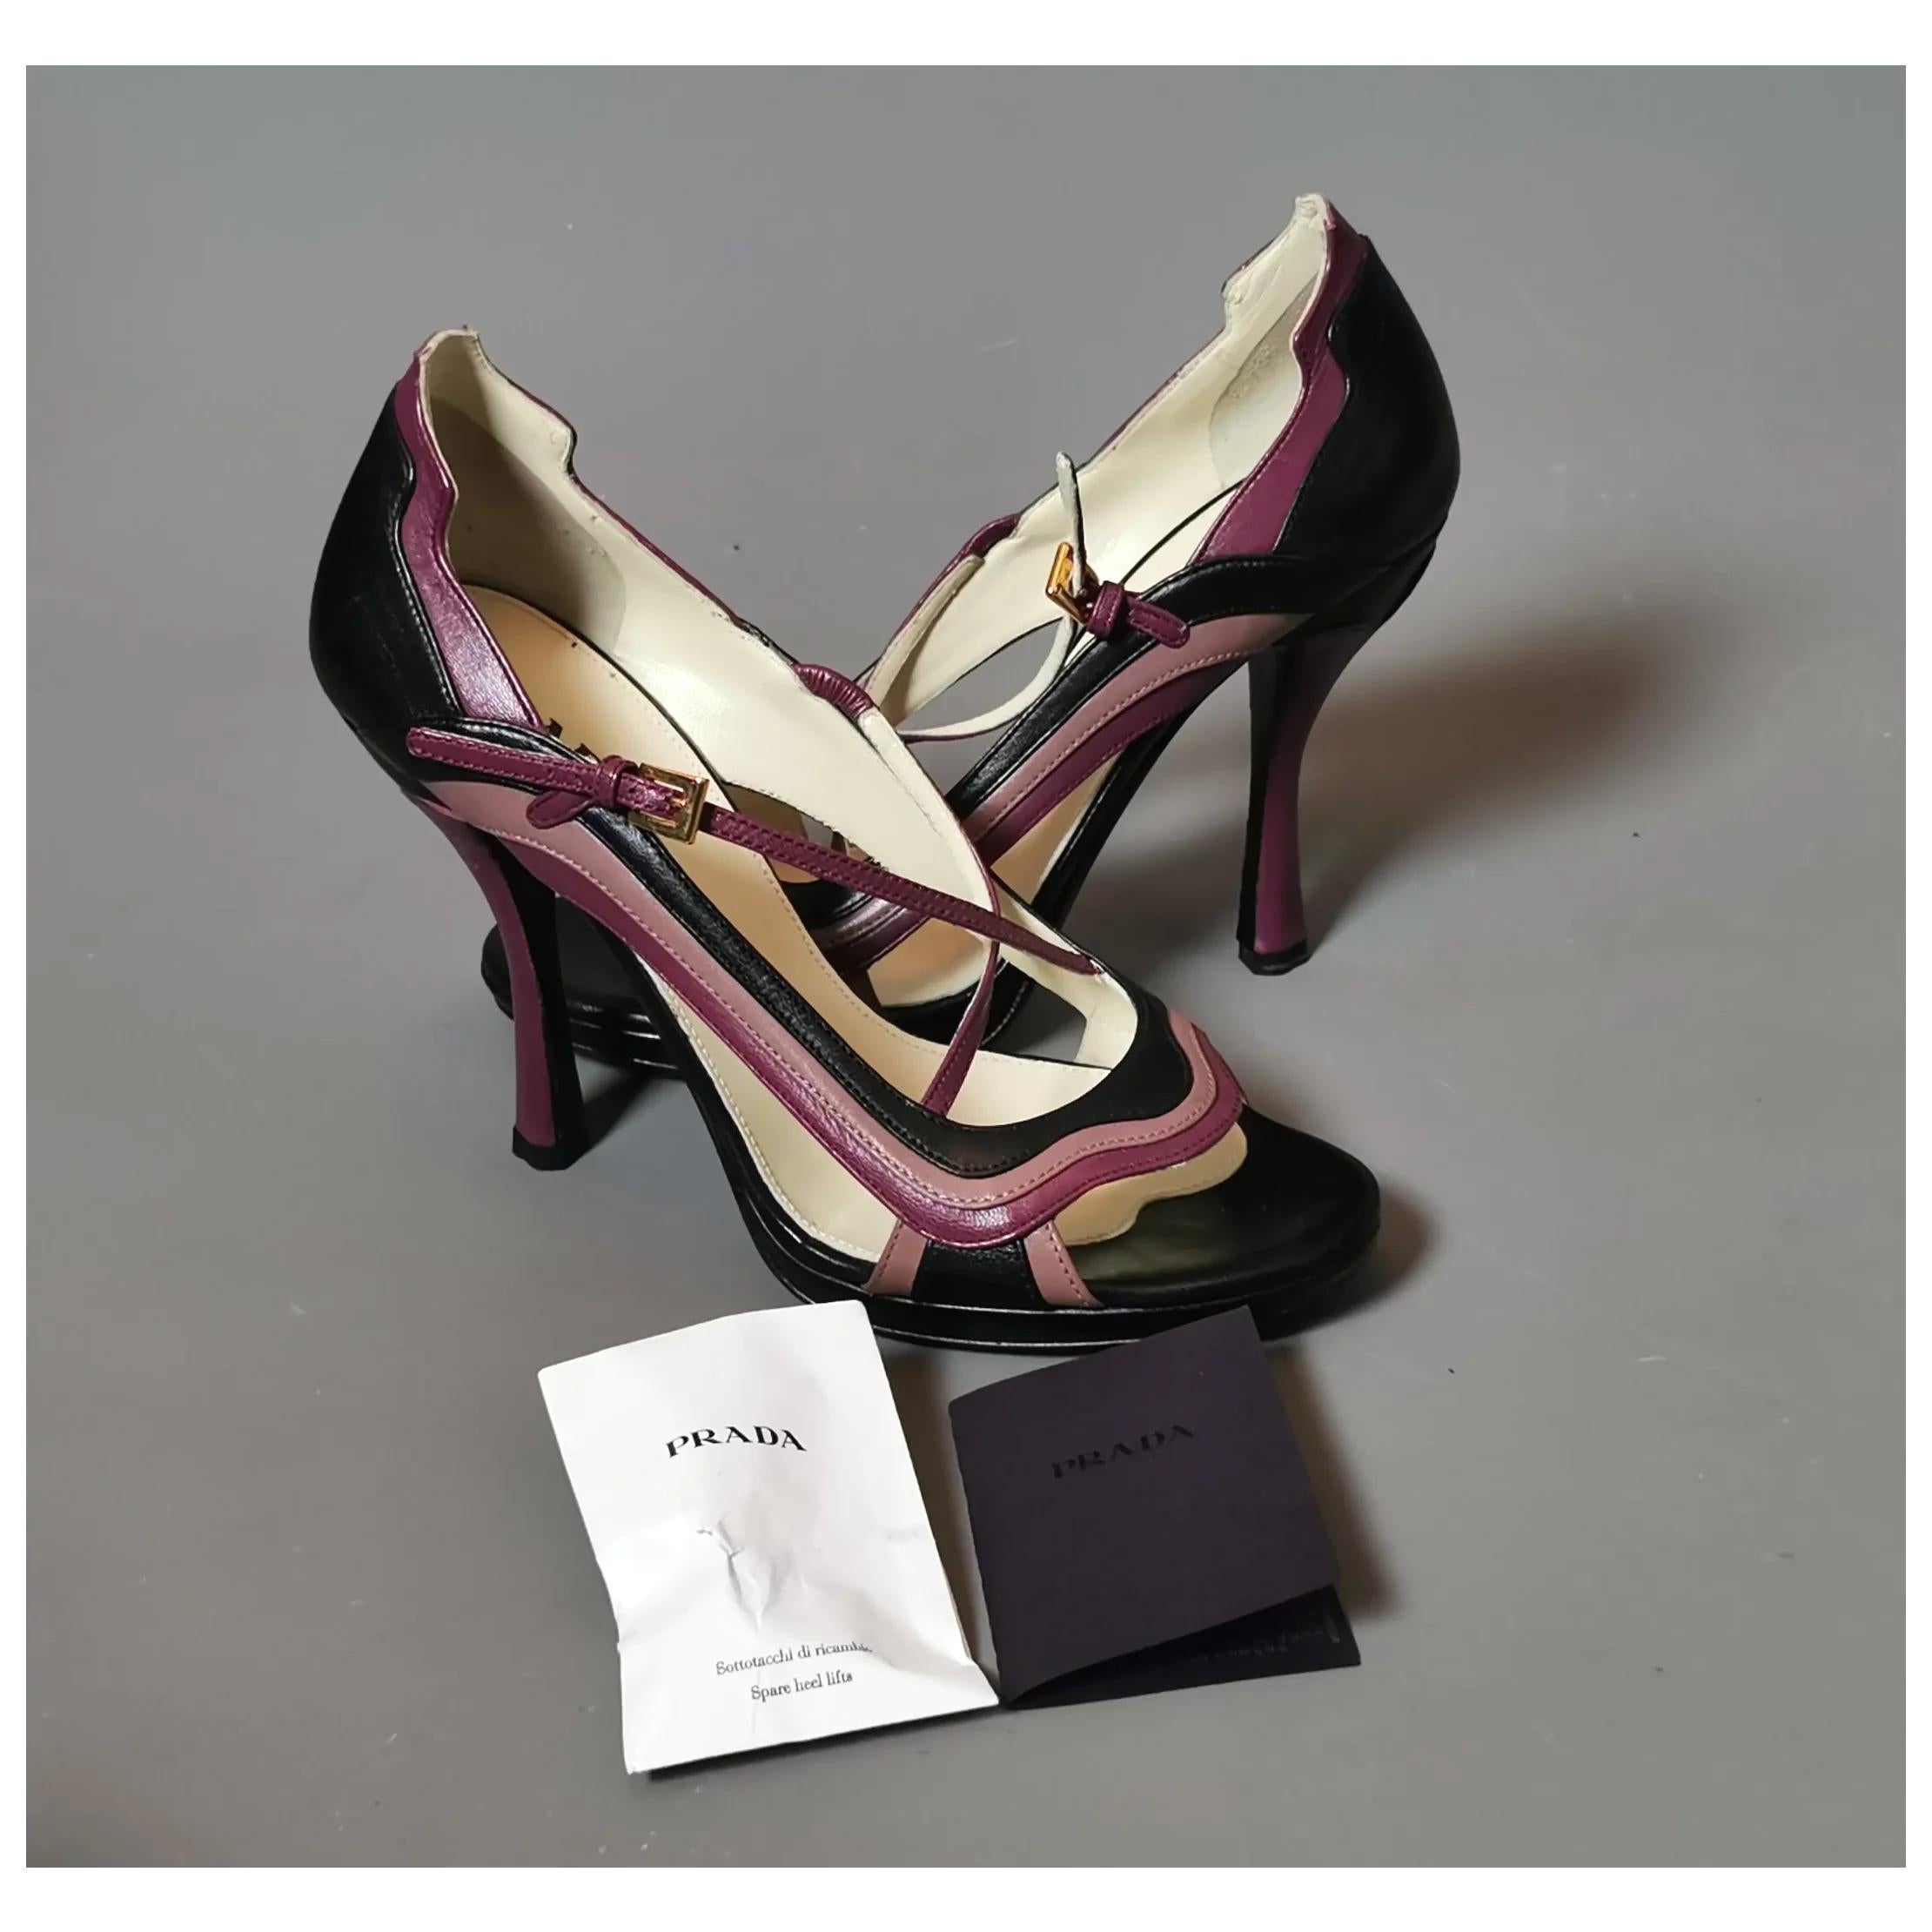 A stunning pair of Prada 'Fairy Garden' Jane stiletto heel shoes.

Black and magenta coloured leather cut out heels with a wave design.

They have tall stiletto heels and a Crossover strap that fastens with a gold tone buckle, the shoes have a peep